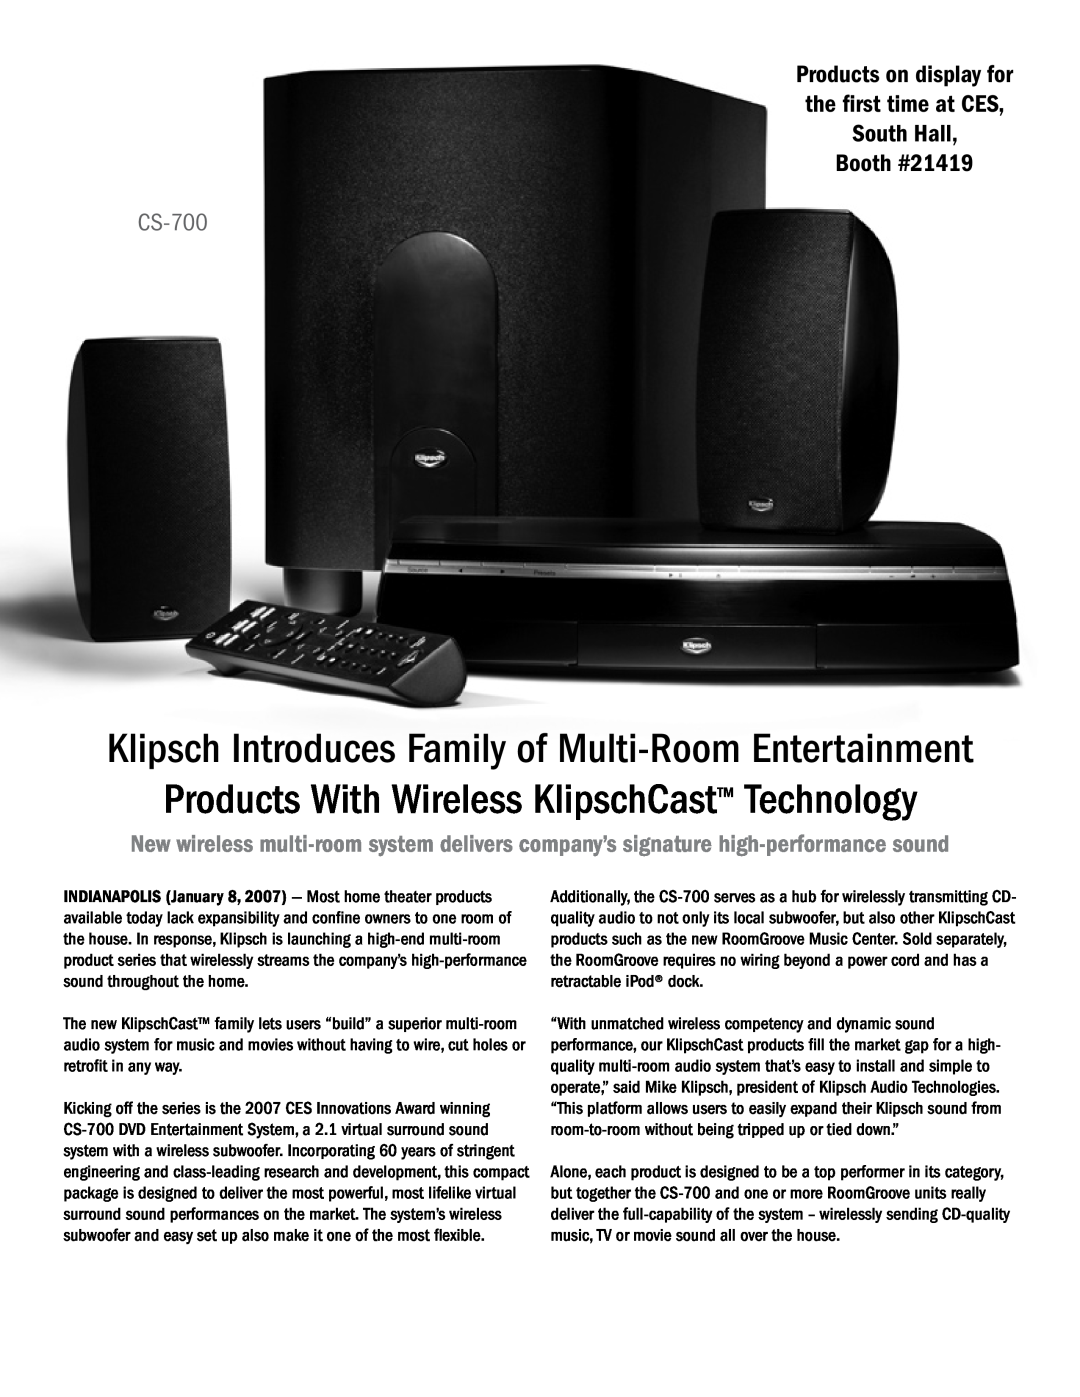 PYLE Audio CES 2007 manual CS-700, Products With Wireless KlipschCast Technology, Booth #21419 